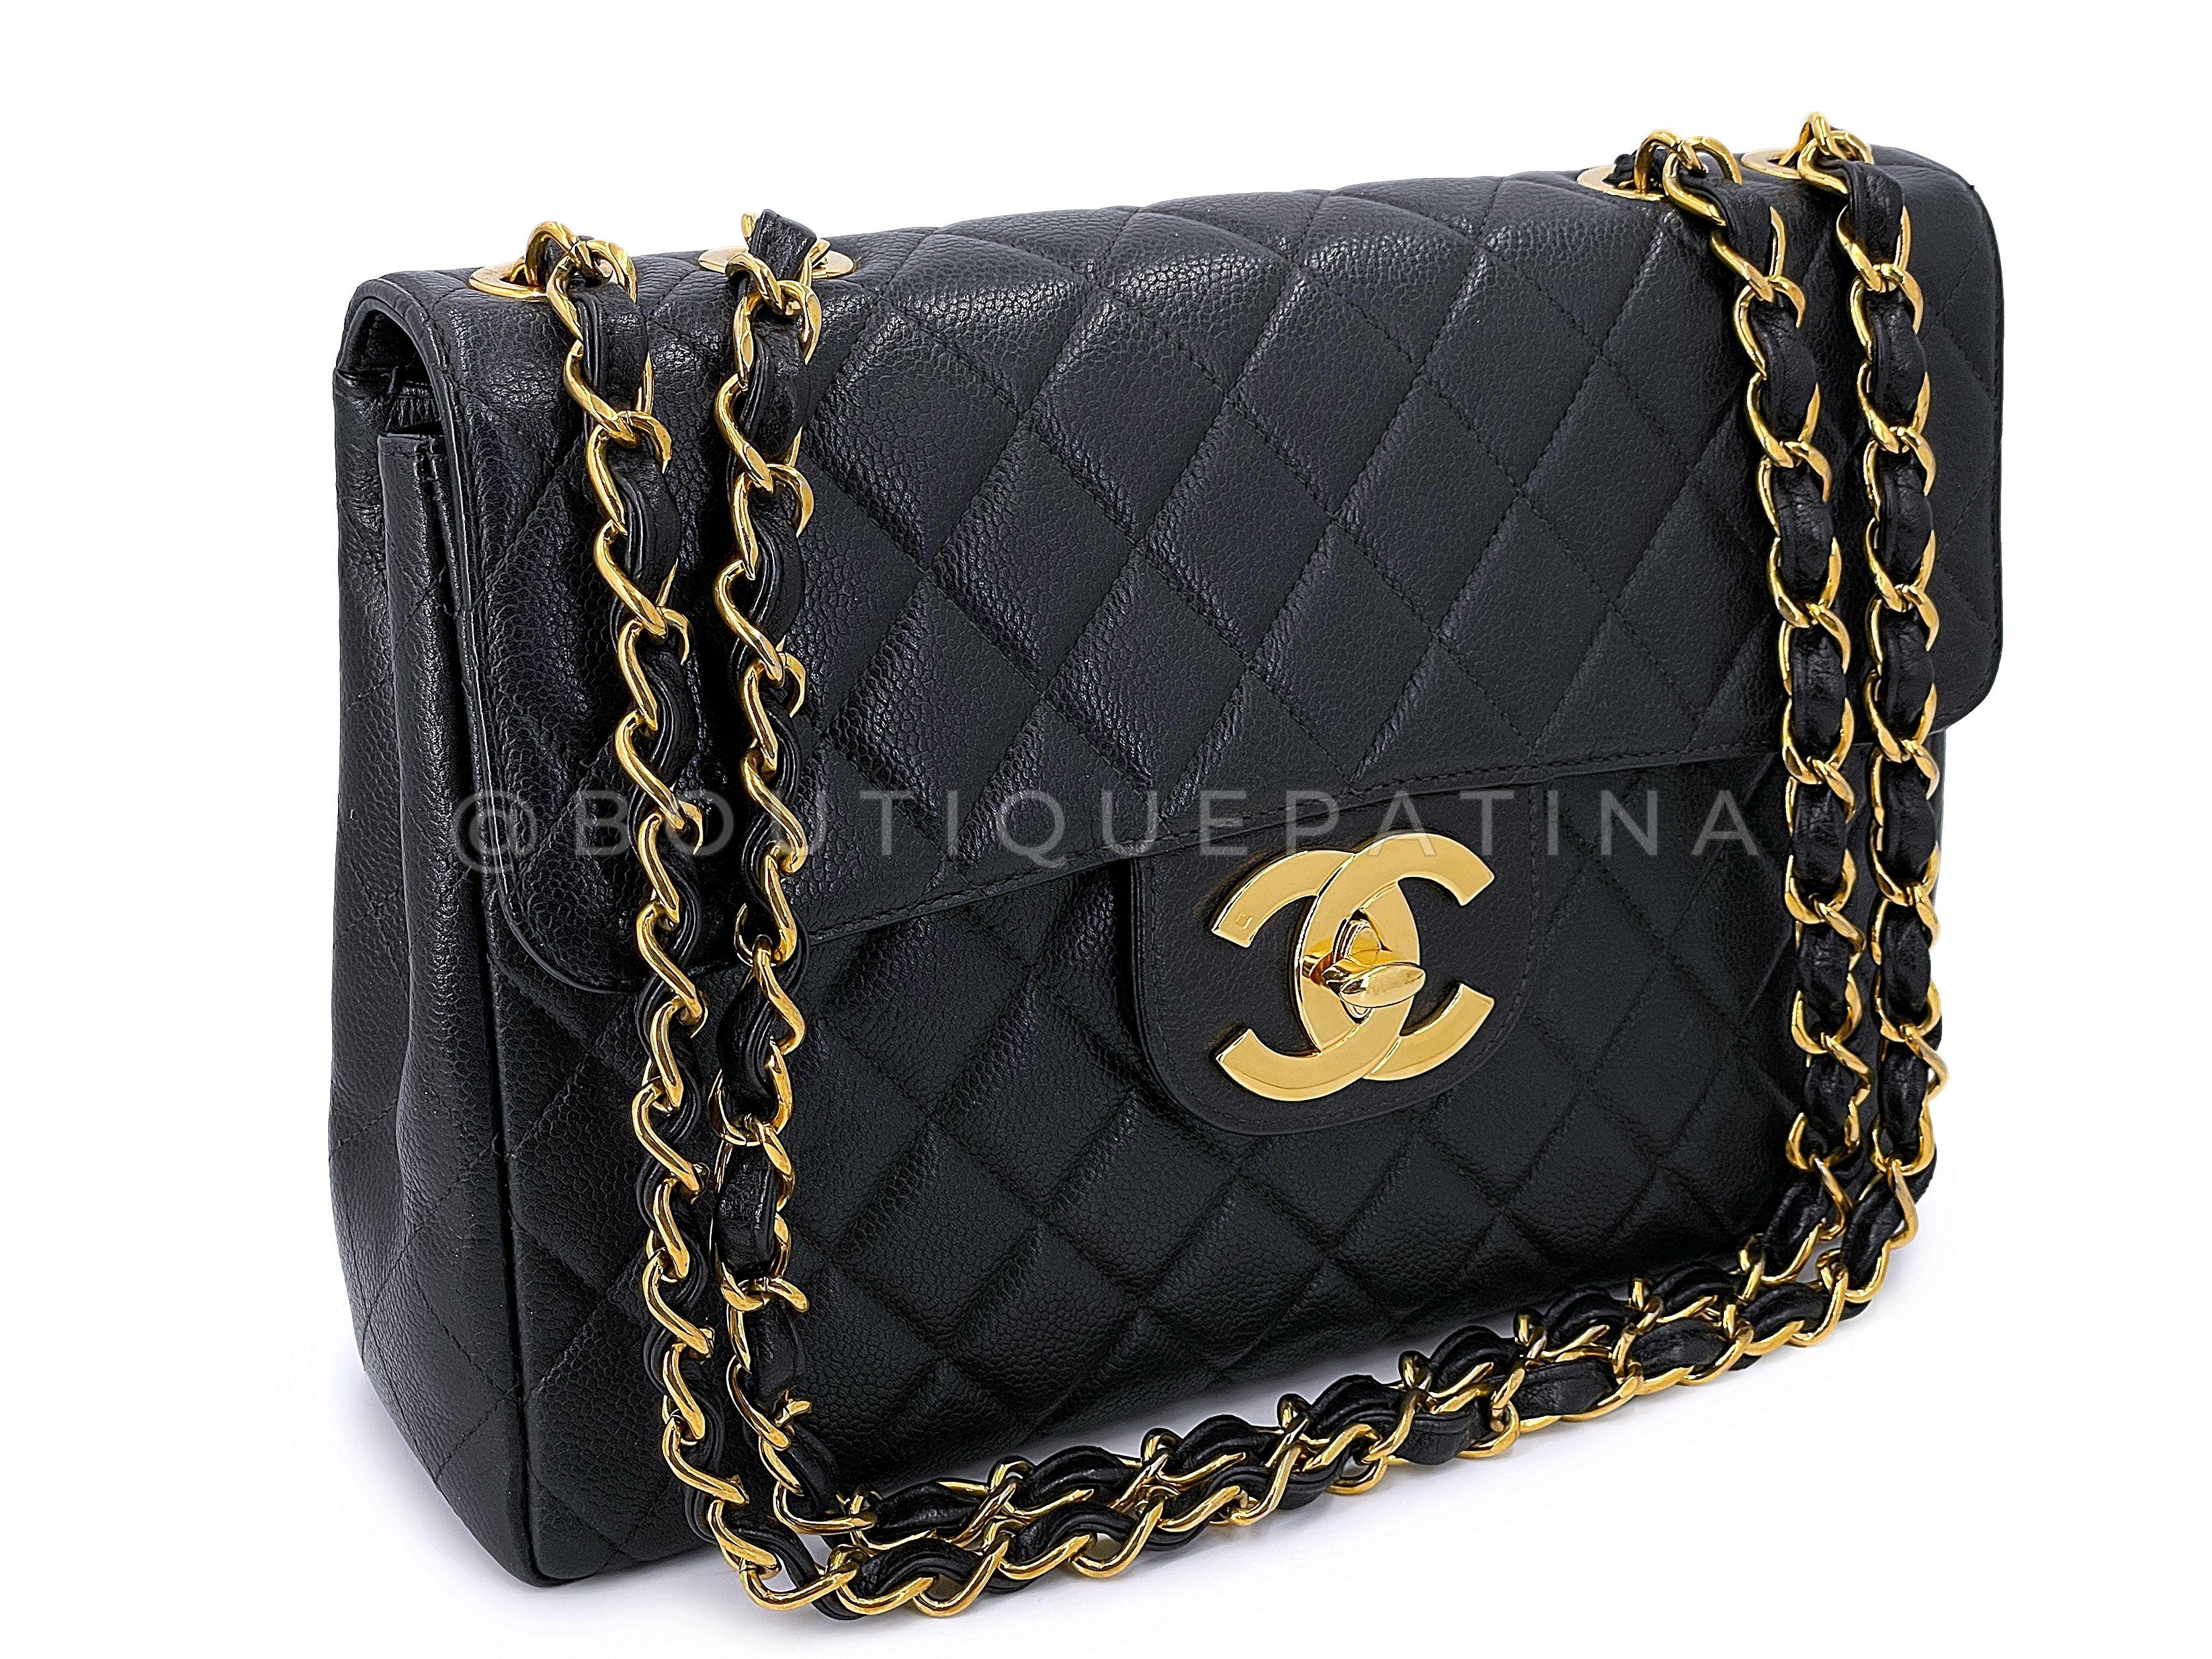 Store item: 67441
A holy grail is this vintage classic jumbo with oversized CC in caviar leather. Vintage caviar bags in excellent condition are hard to find -- usually vintage Chanel bags are in lambskin. The combination of the pebbled calfskin